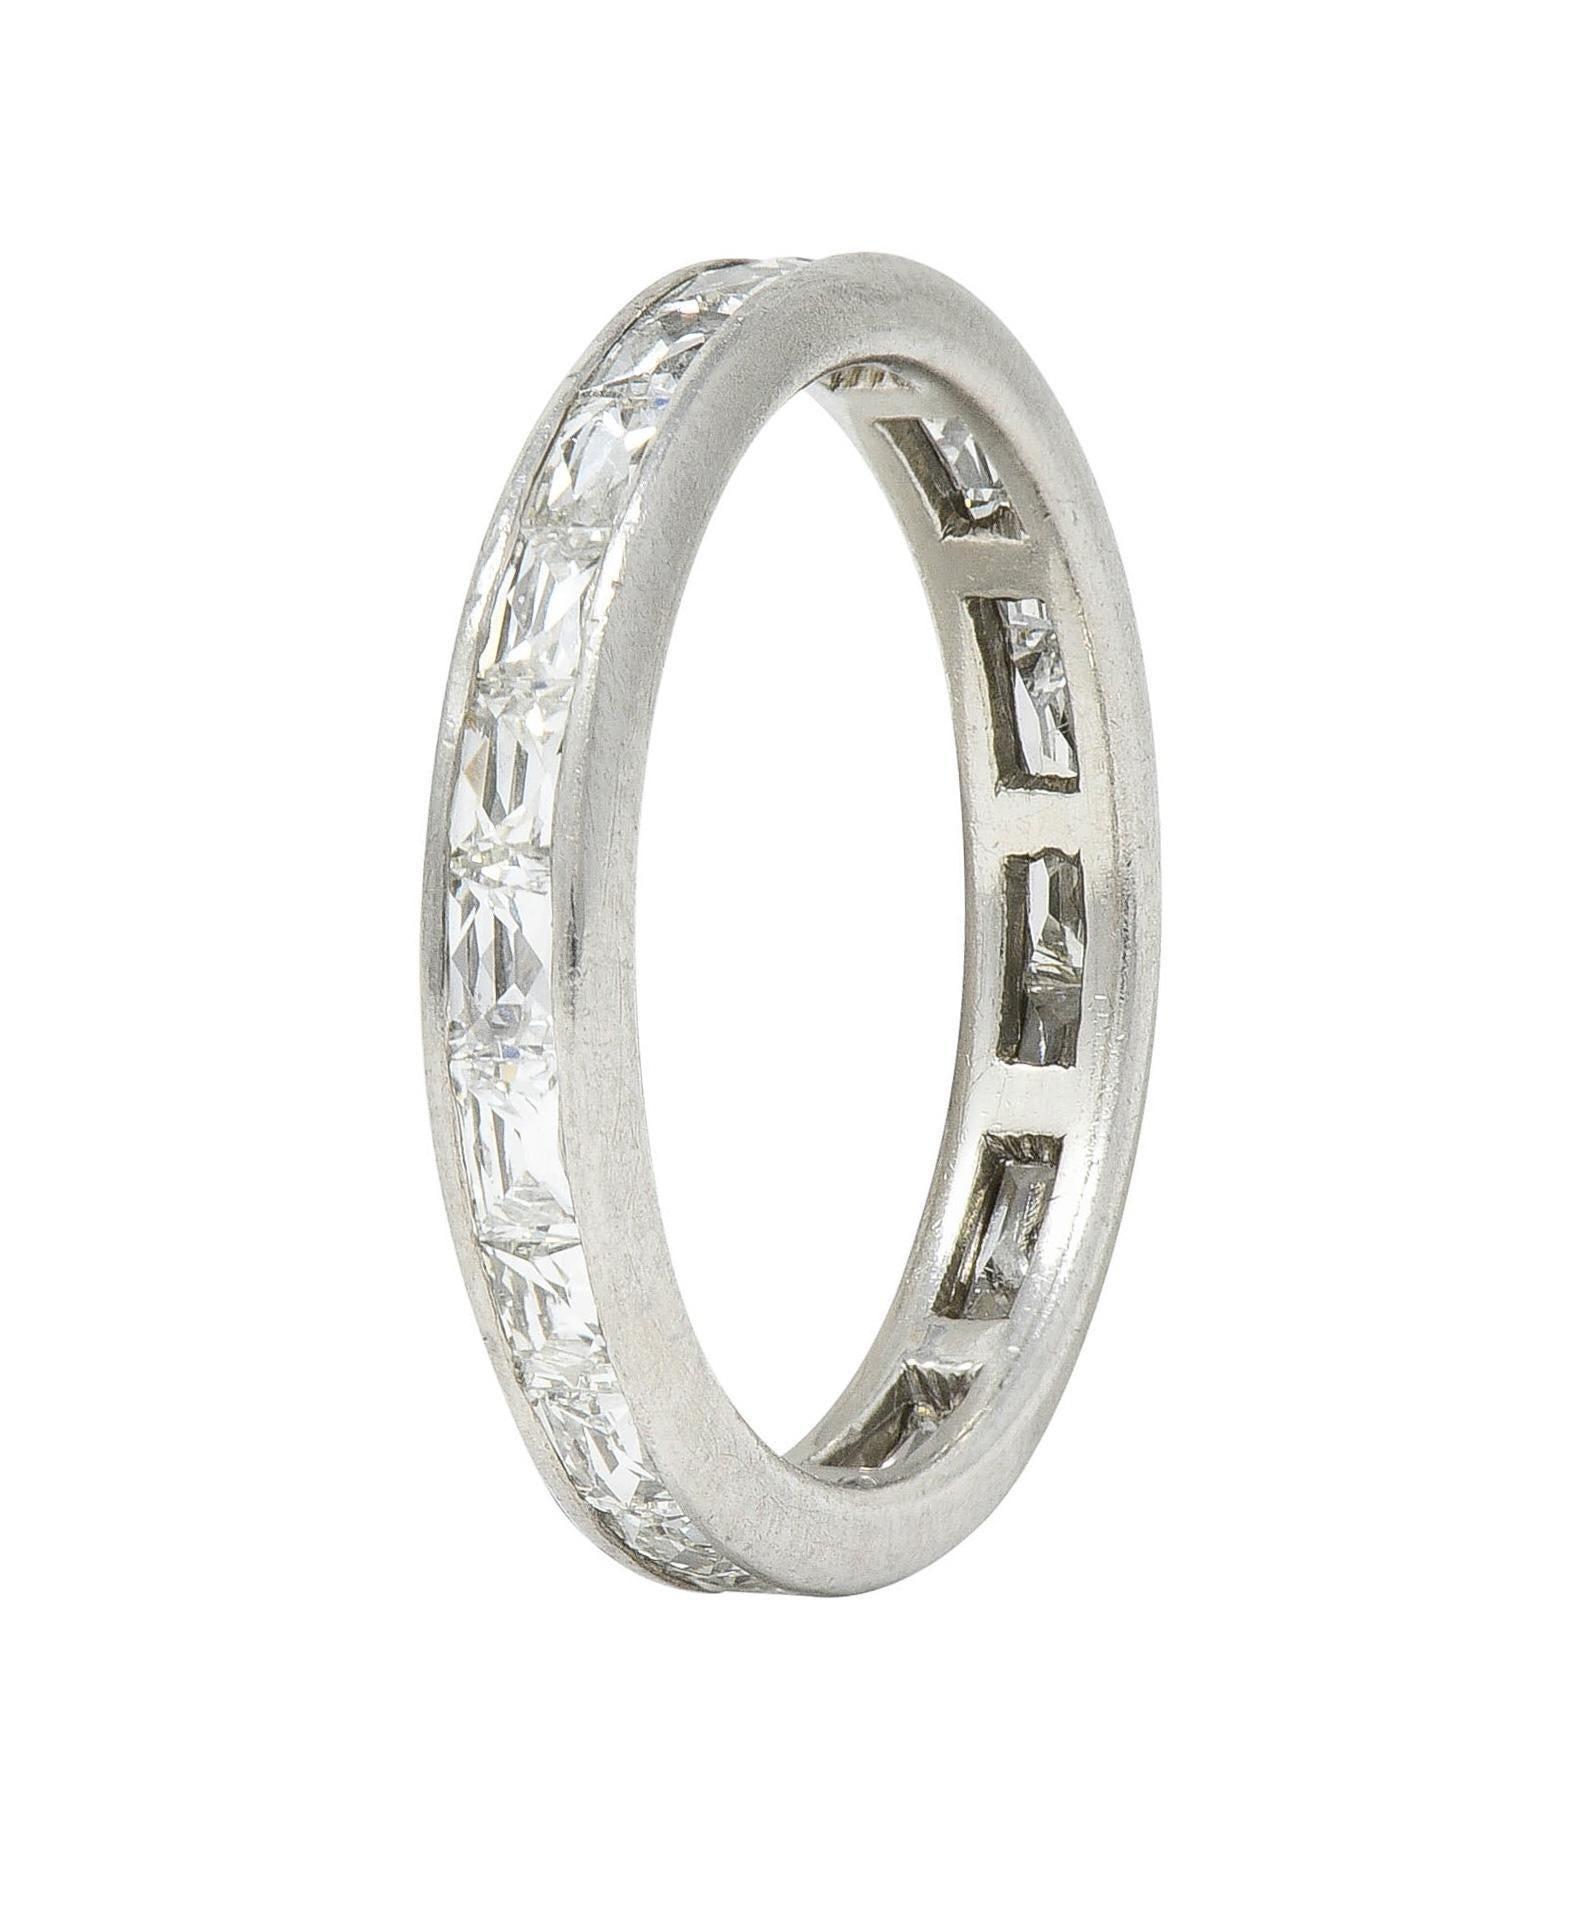 Ring features elongated French cut diamonds channel set fully around
Weighing approximately 2.05 carat total - G color with VS clarity
With high polished platinum finish
Stamped plat for platinum
Fully signed Neil Lane
Circa: 2000s
Ring size: 4 3/4